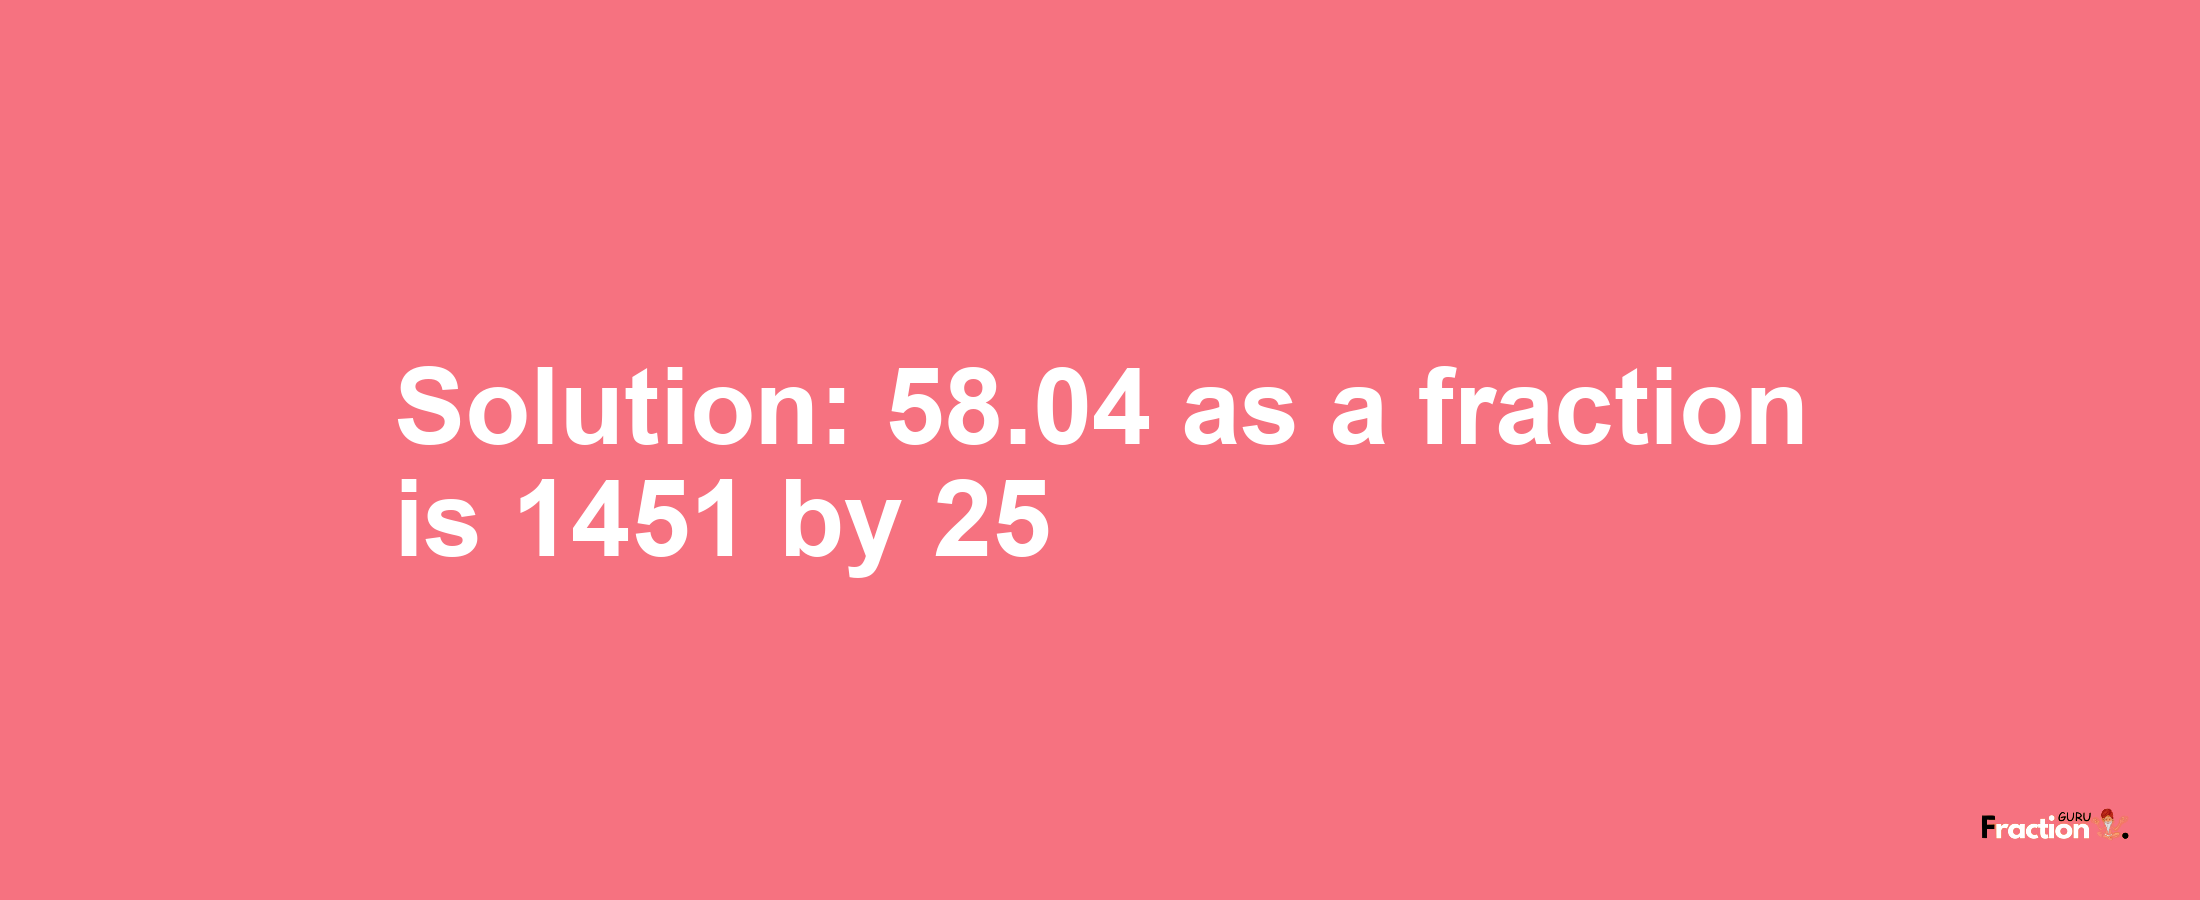 Solution:58.04 as a fraction is 1451/25